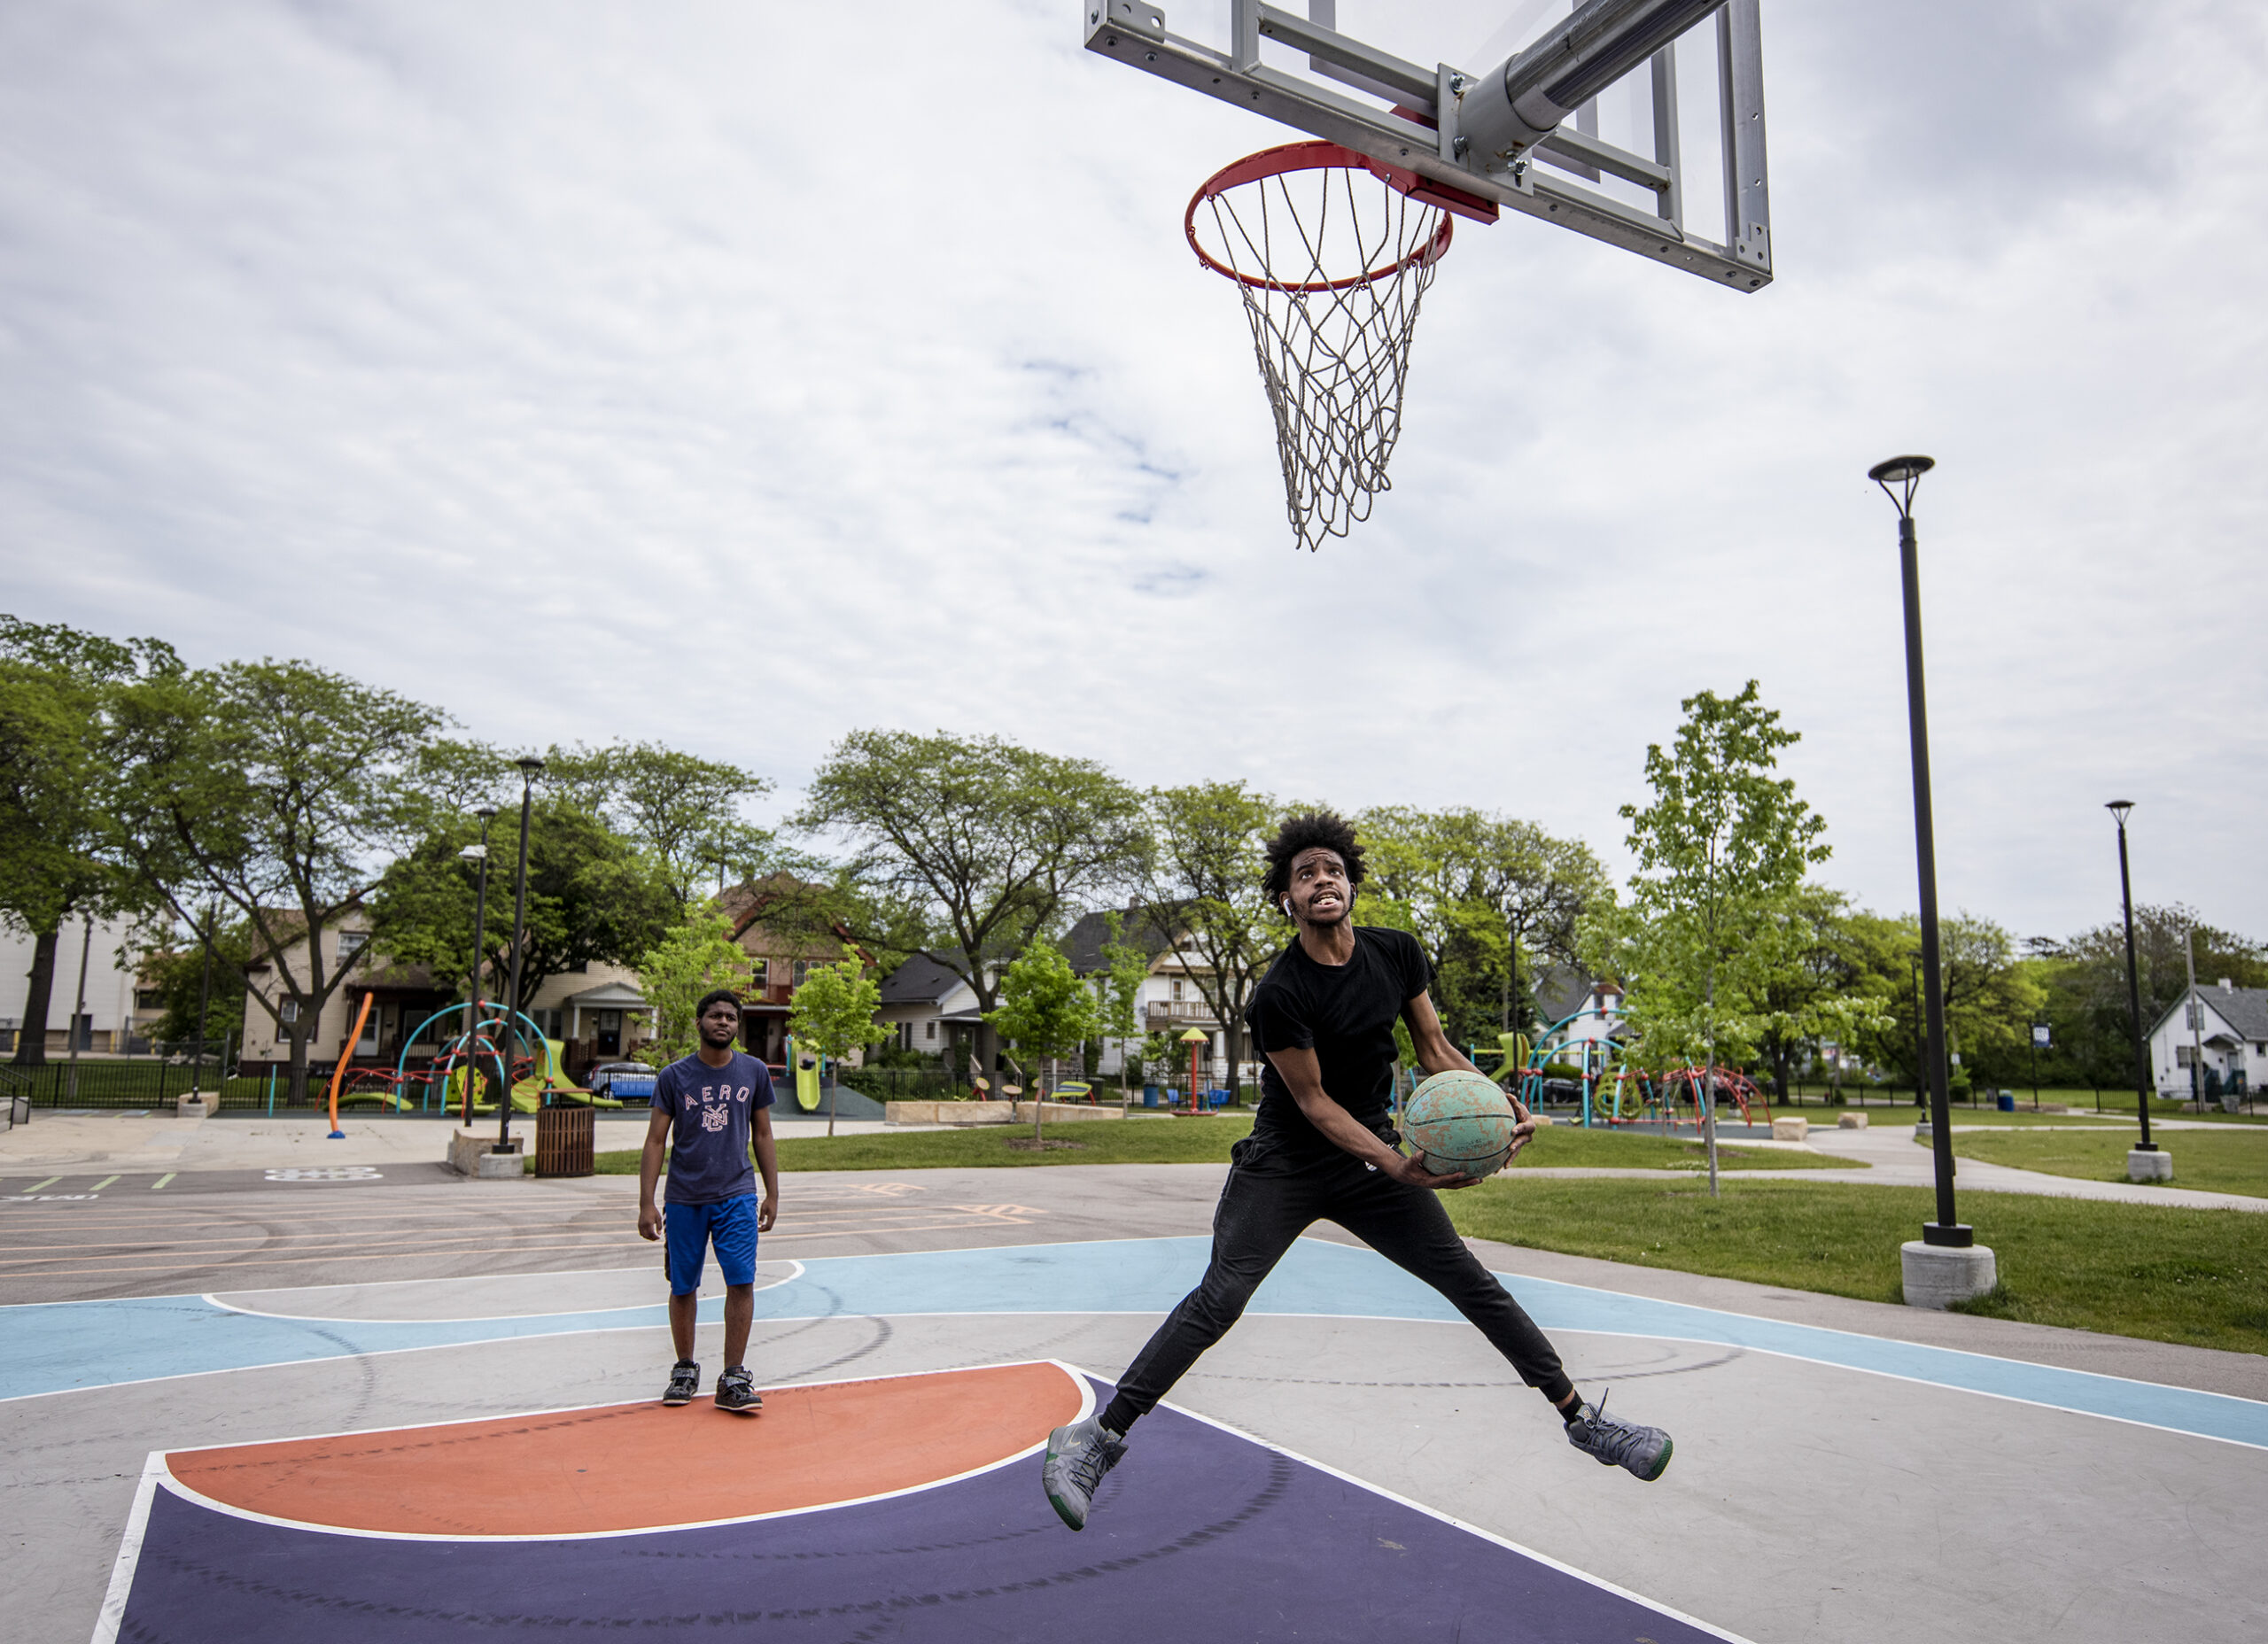 A man runs up to the basketball goal holding a basketball outdoors at a park.